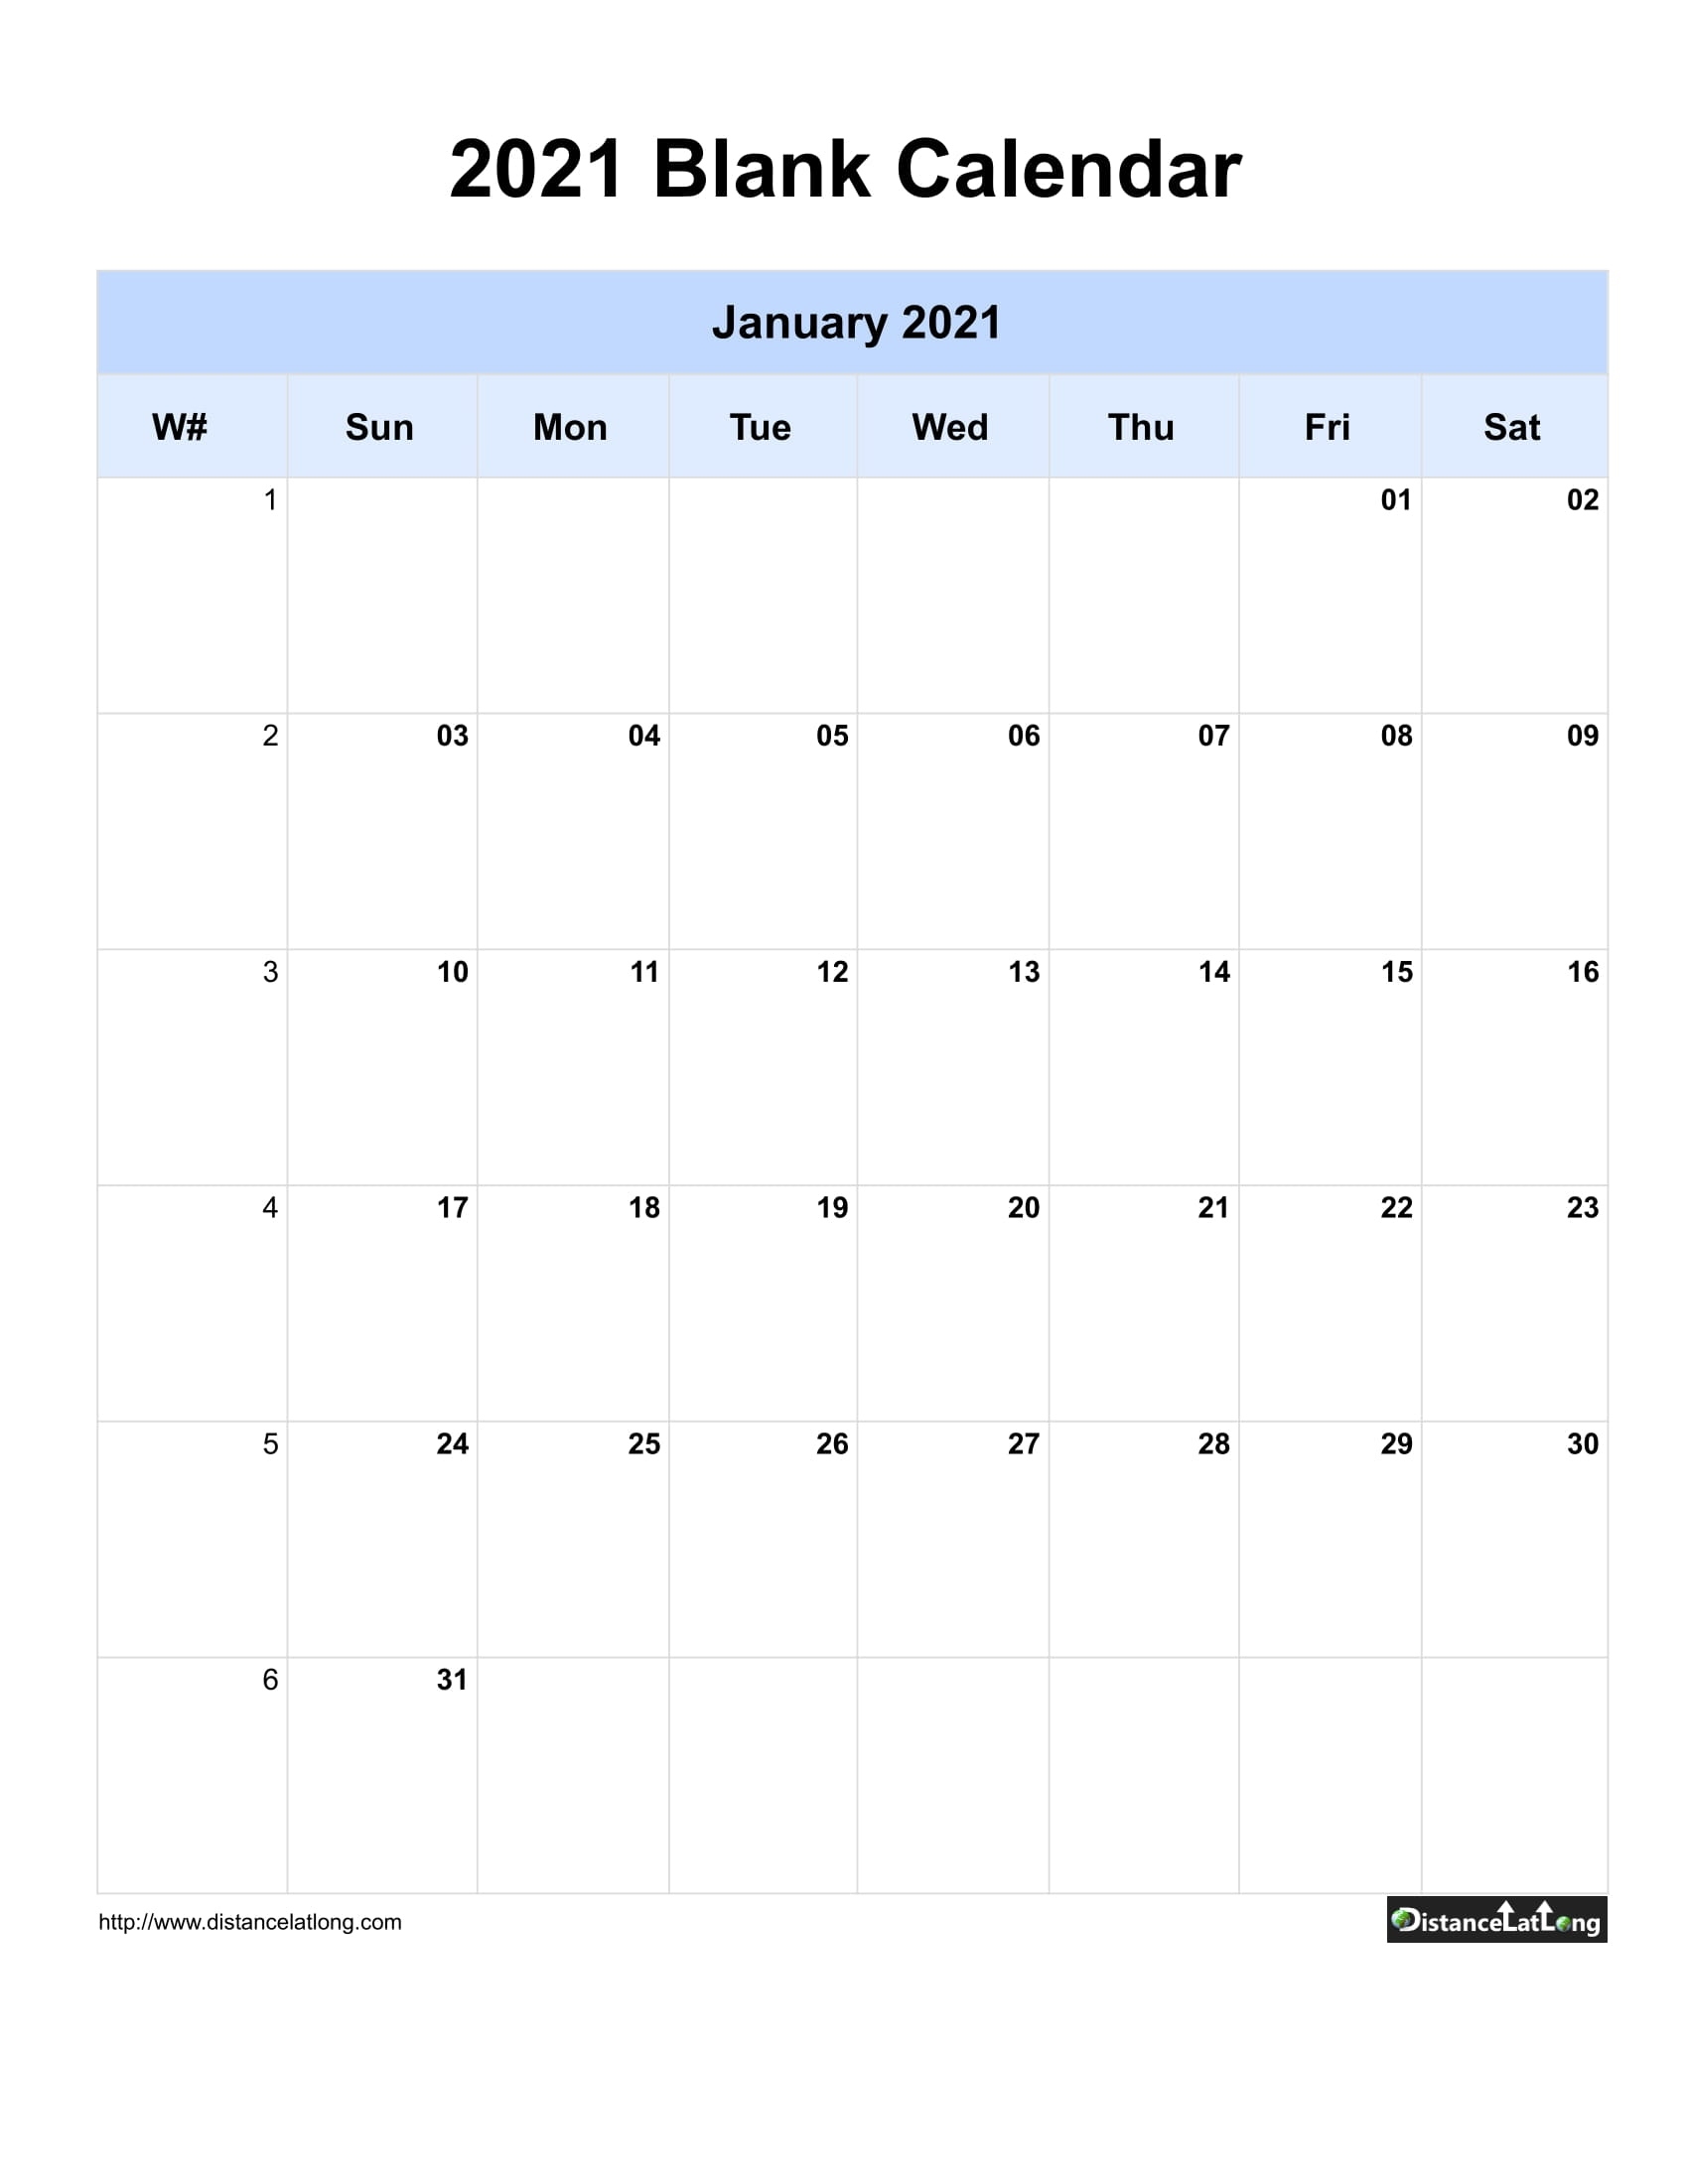 Blank Calendar 2021 One Month Per Page Sunday To Saturday With Weekno June 2021 Calendar Nz